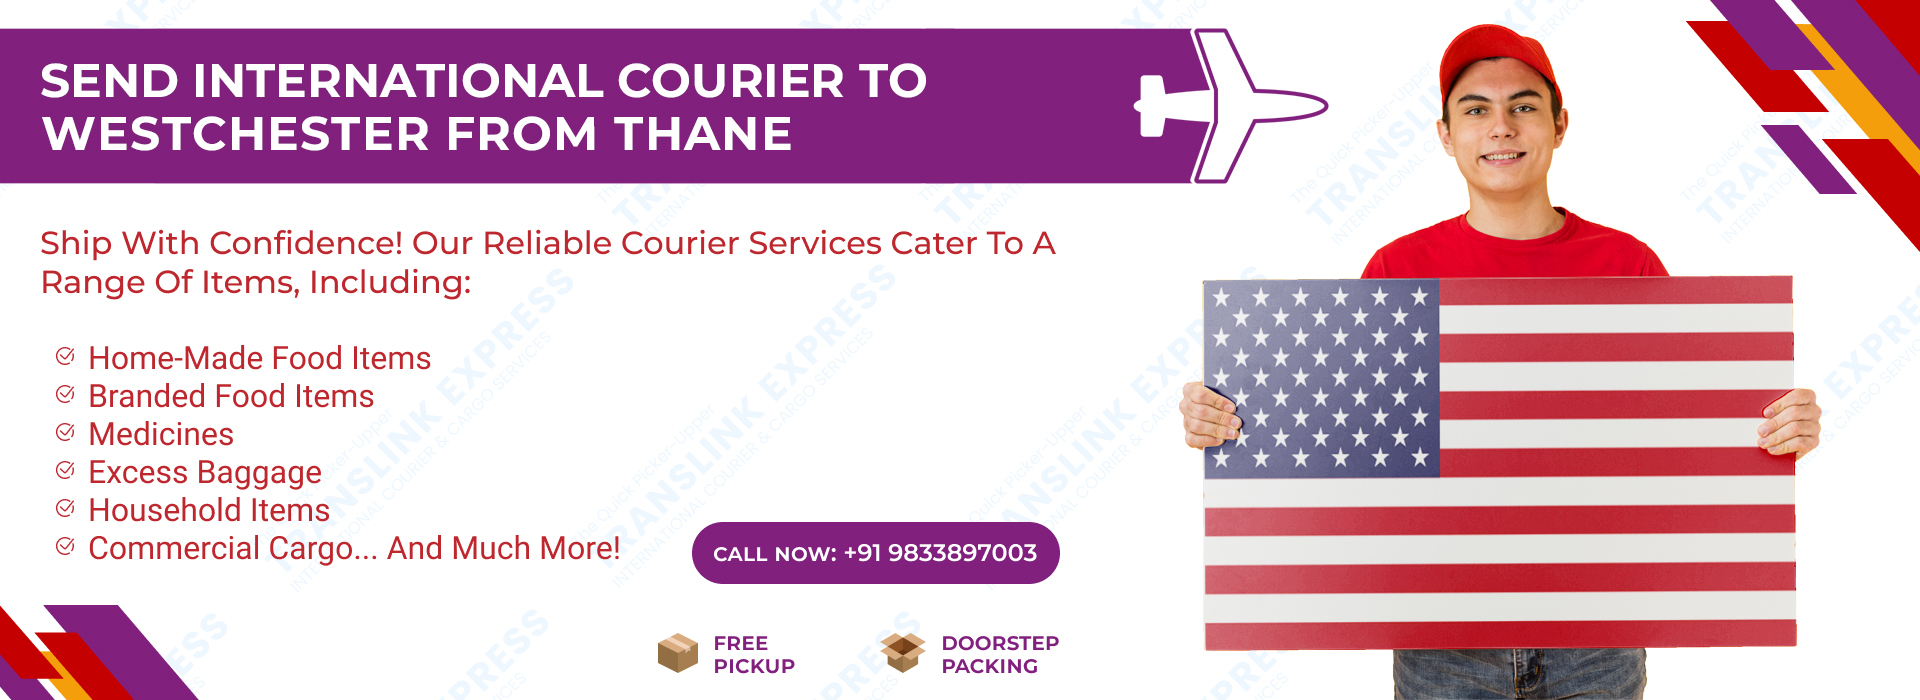 Courier to Westchester From Thane